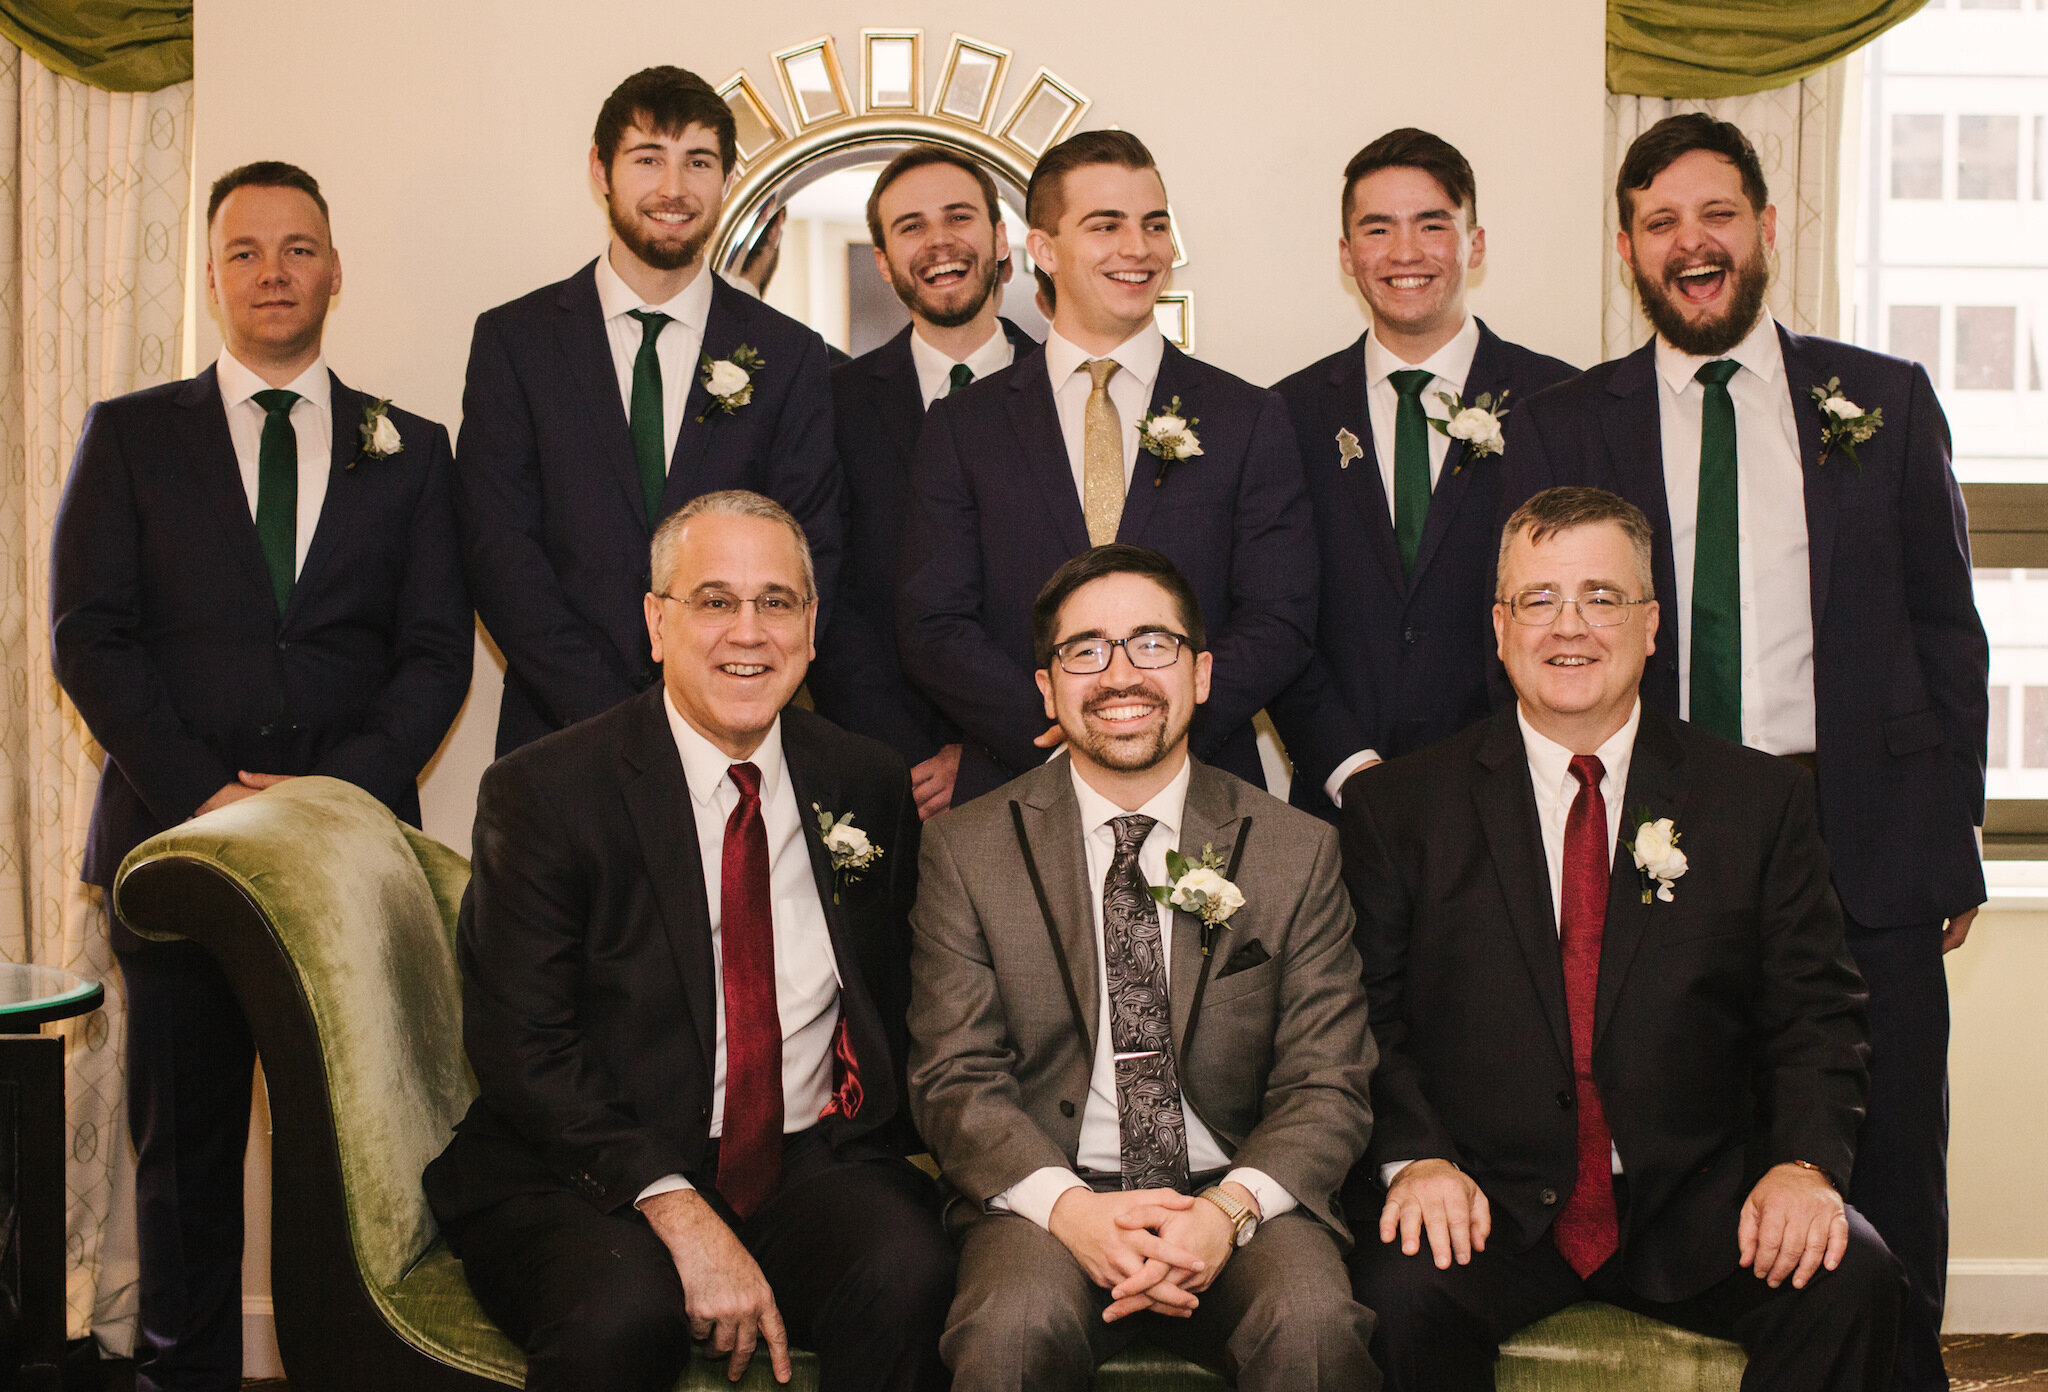 Groom and groomsmen attire: Elegant Jewel-Toned Wedding captured by Dorey Kronick featured on CHI thee WED